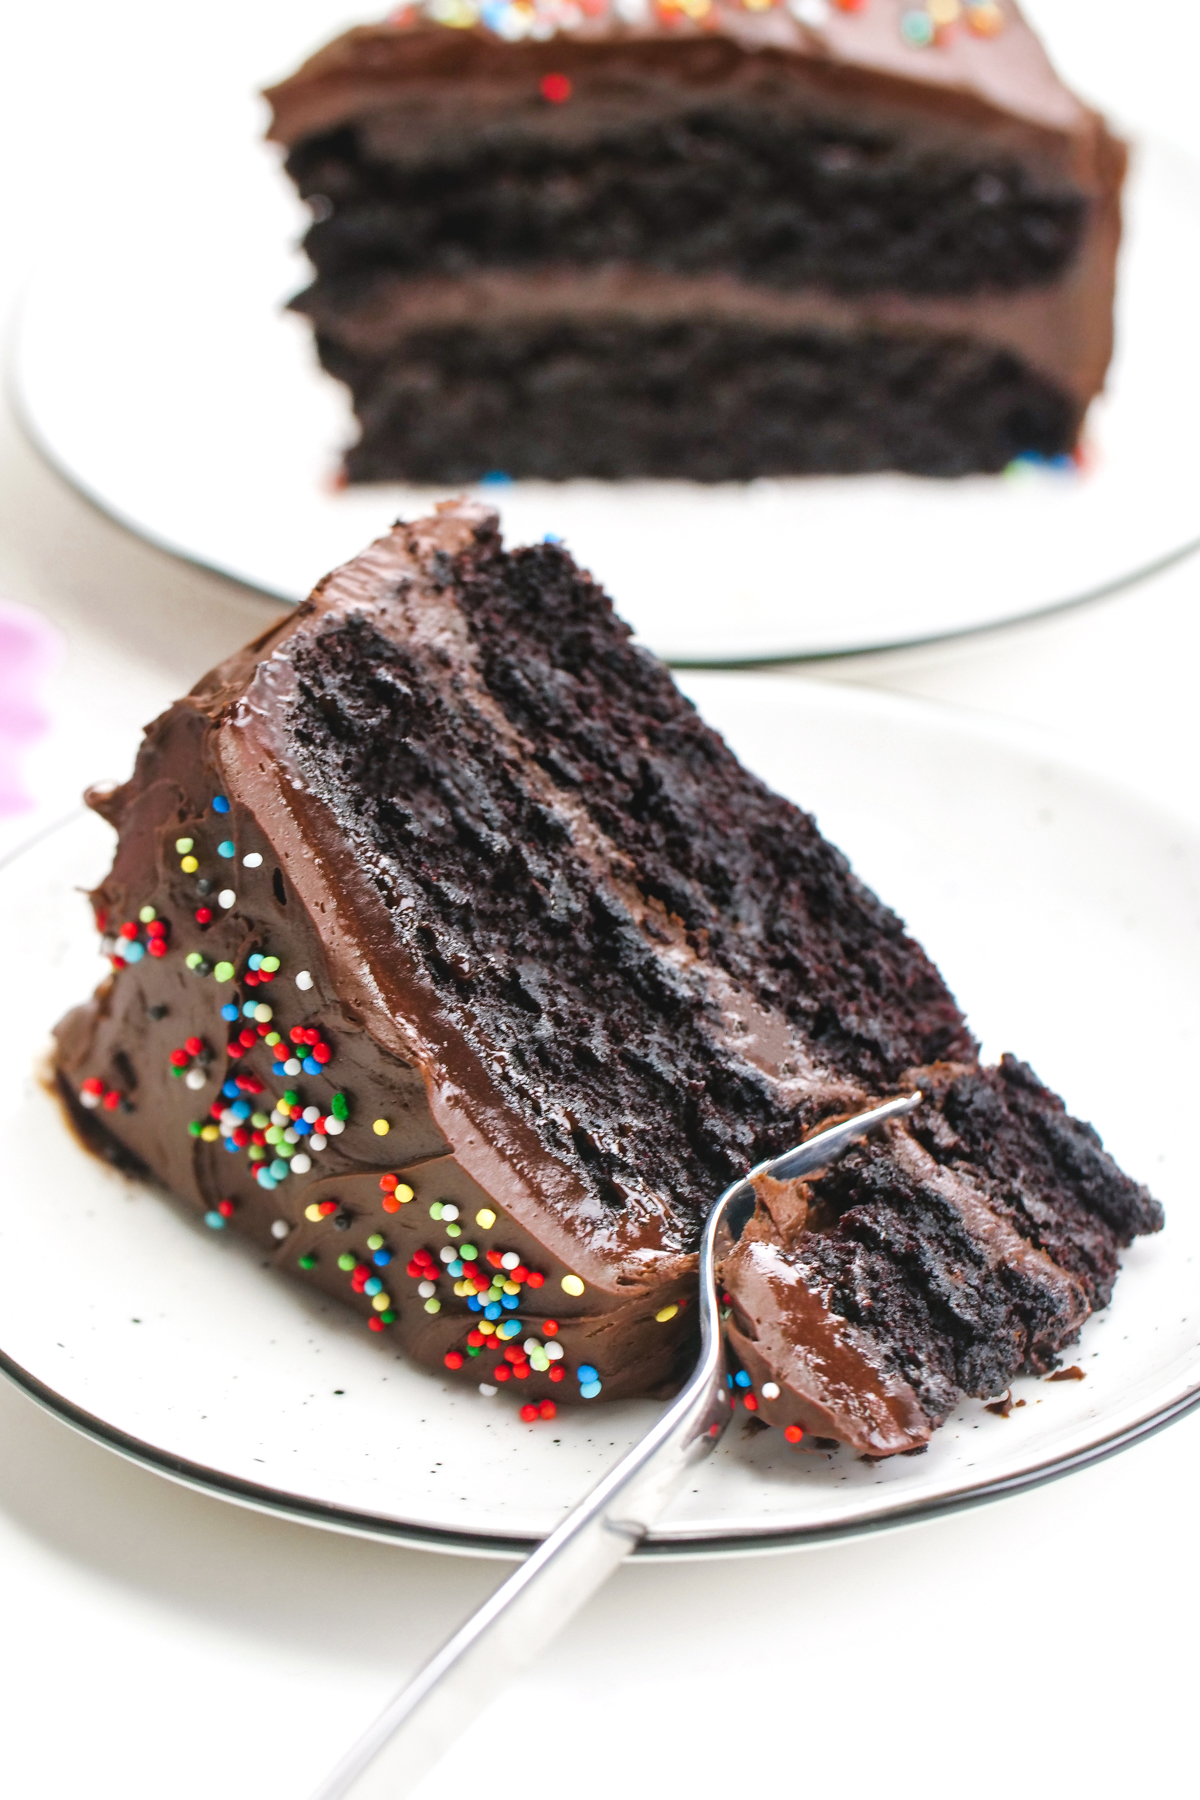 Dairy-Free Chocolate Cake With Chocolate Frosting